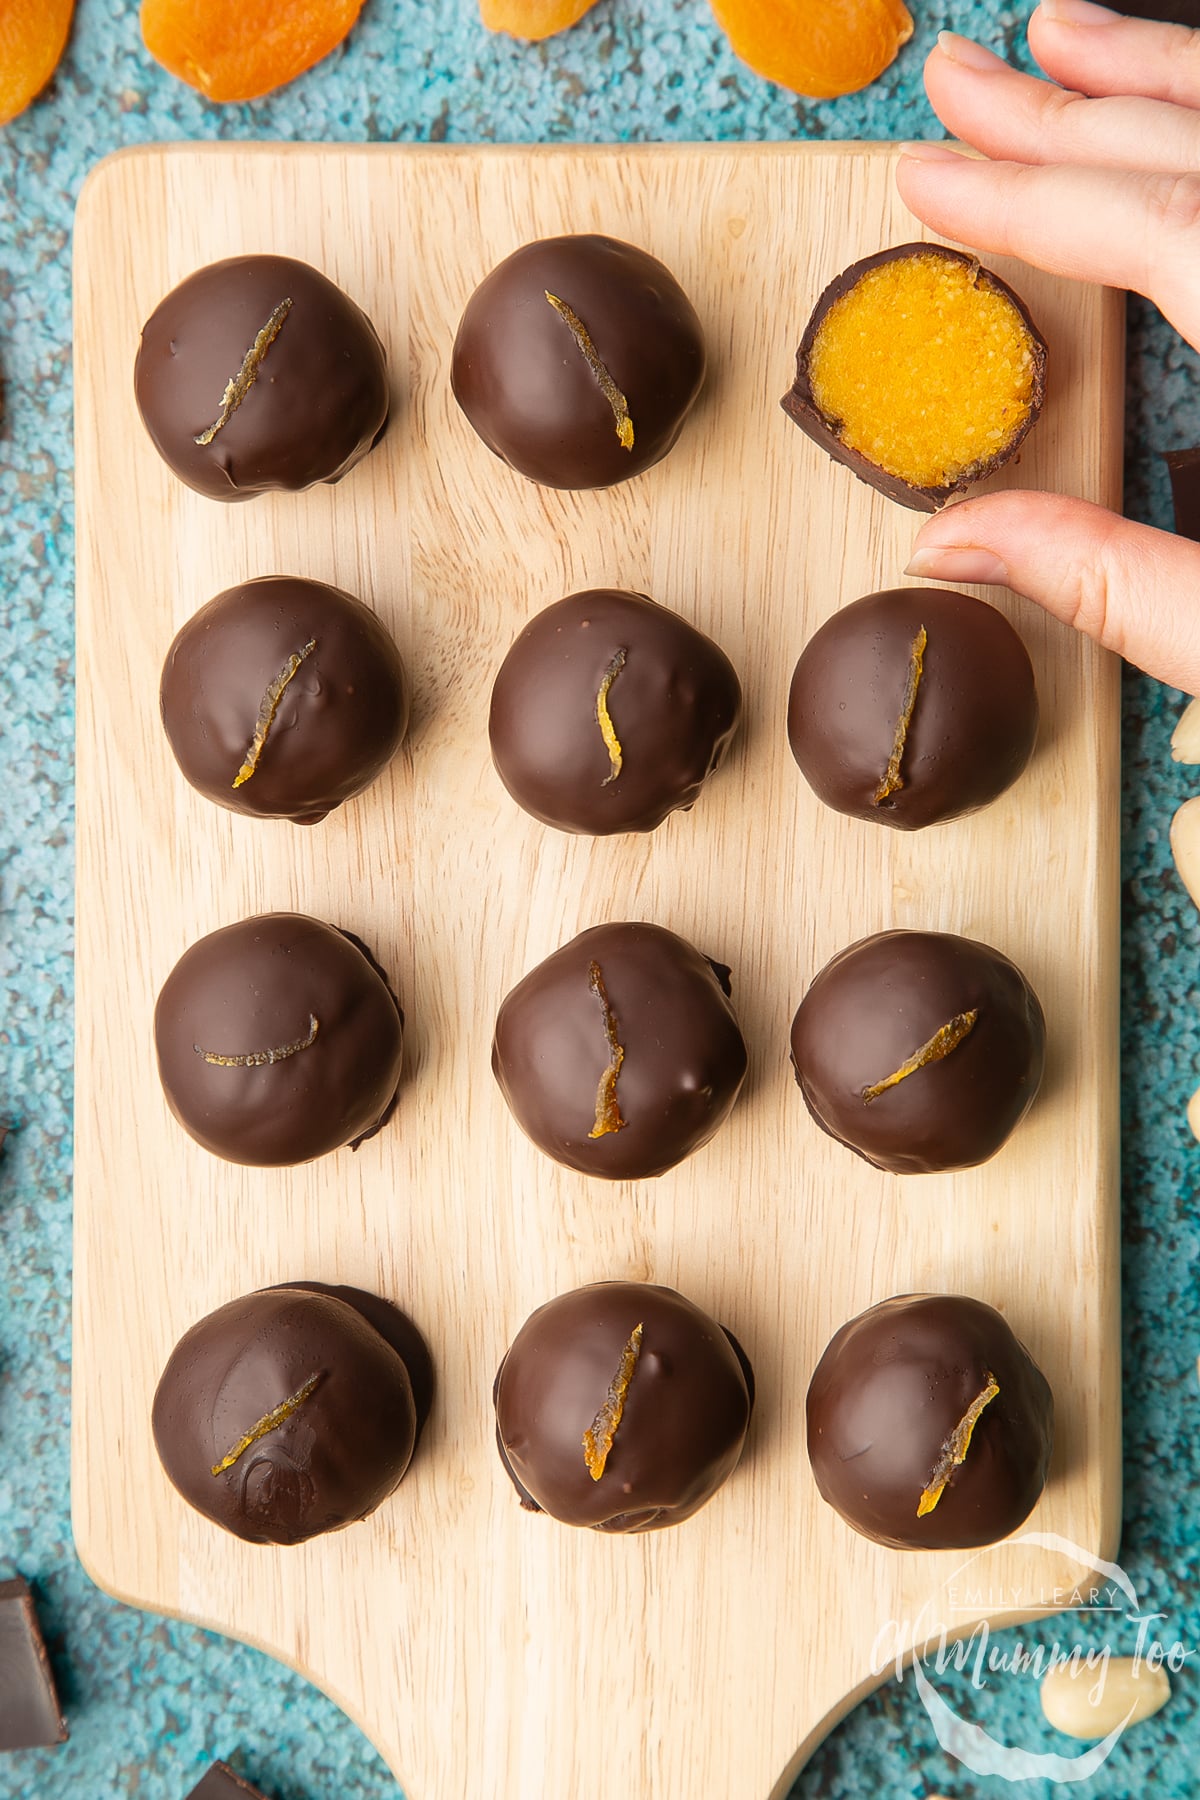 12 chocolate apricot balls arranged on a wooden board. A hand reaches to take one that has been cut in half, revealing the bright orange apricot filling. 